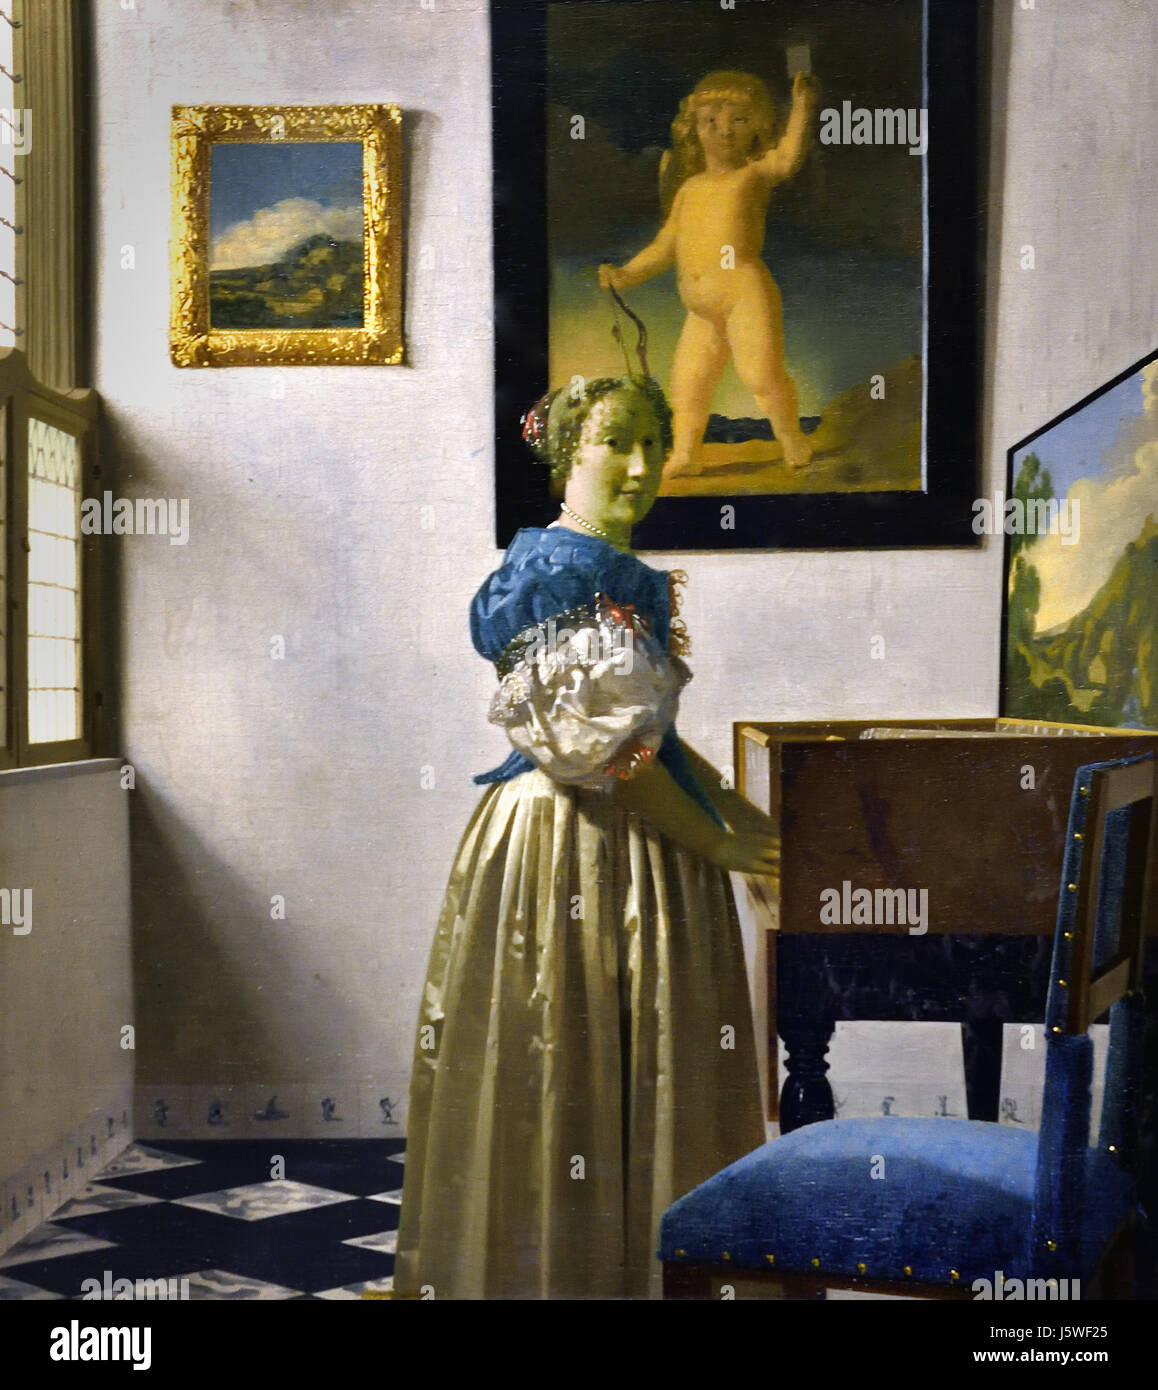 A Young Woman standing at a Virginal 1670-2 Johannes Vermeer 1632 - 1675 Dutch The Netherlands Stock Photo